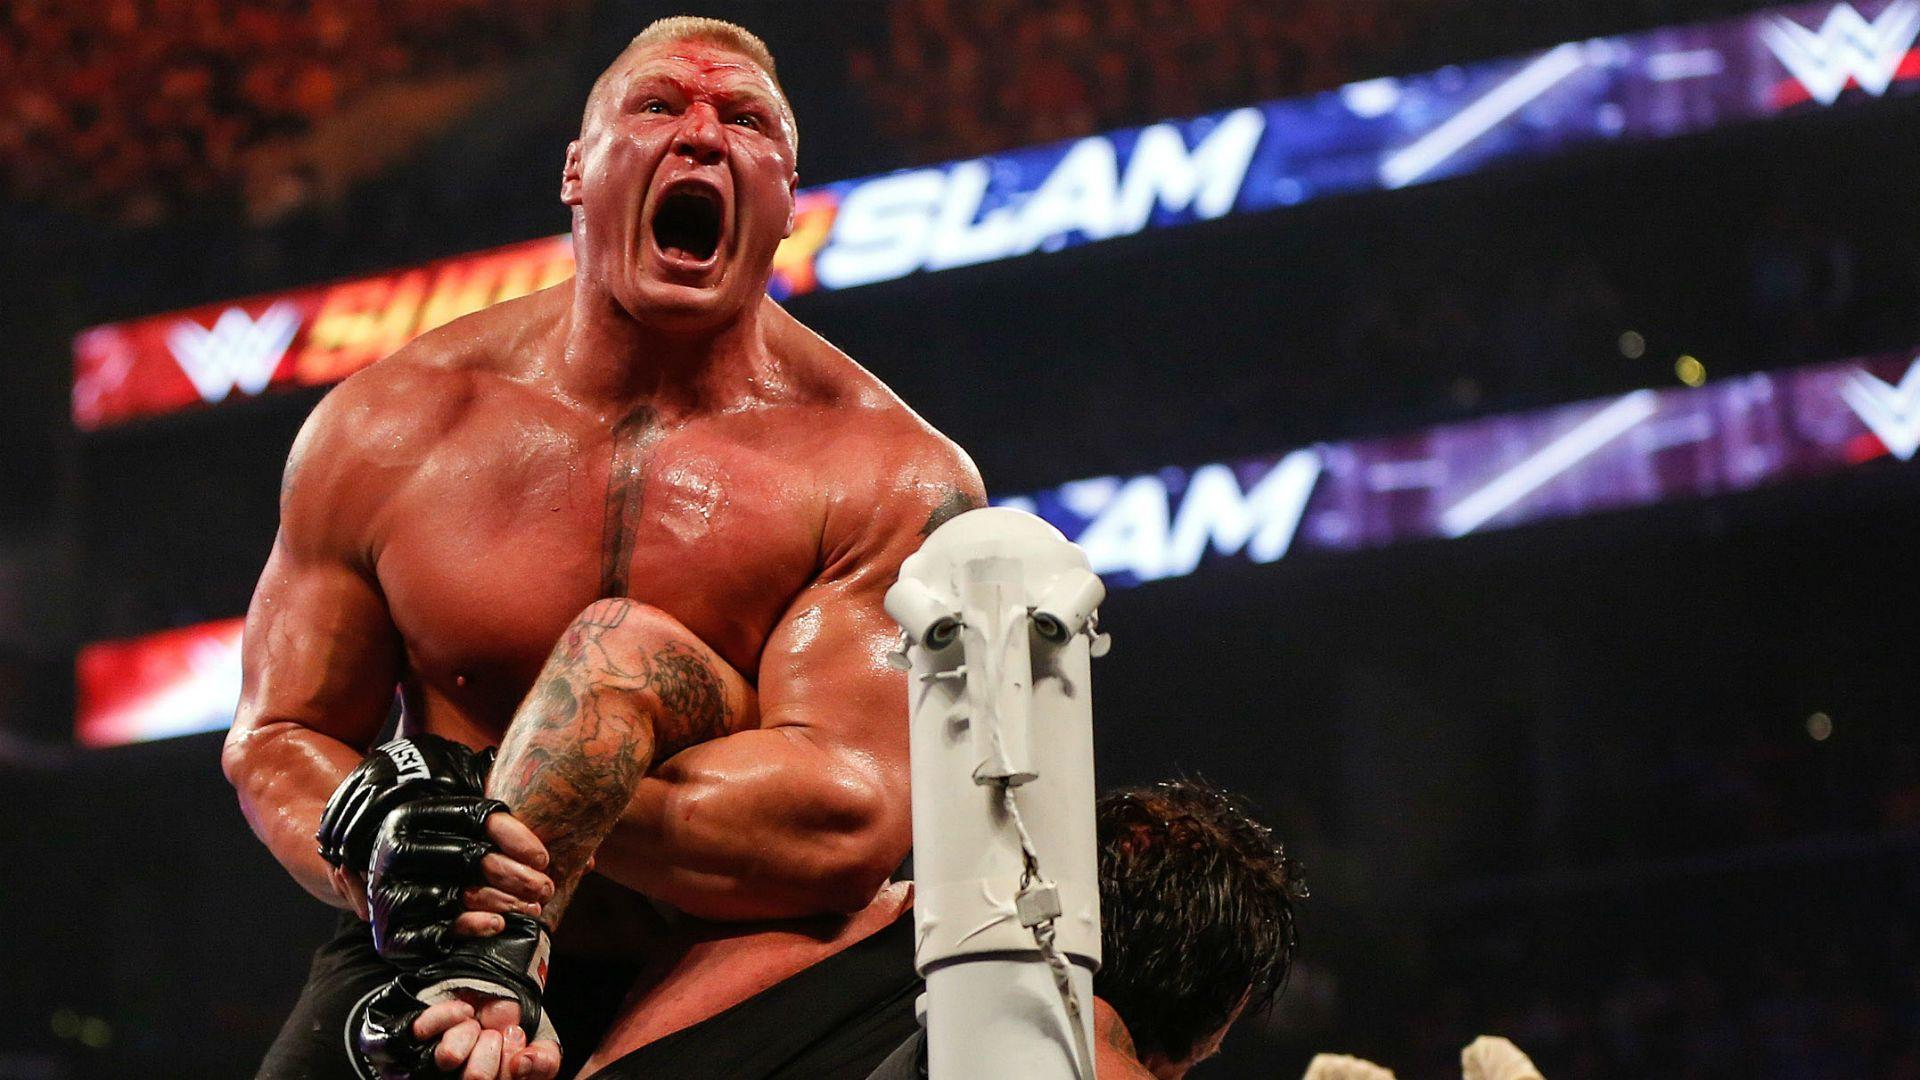 Brock Lesnar will fight Mark Hunt at UFC 200 in July. MMA